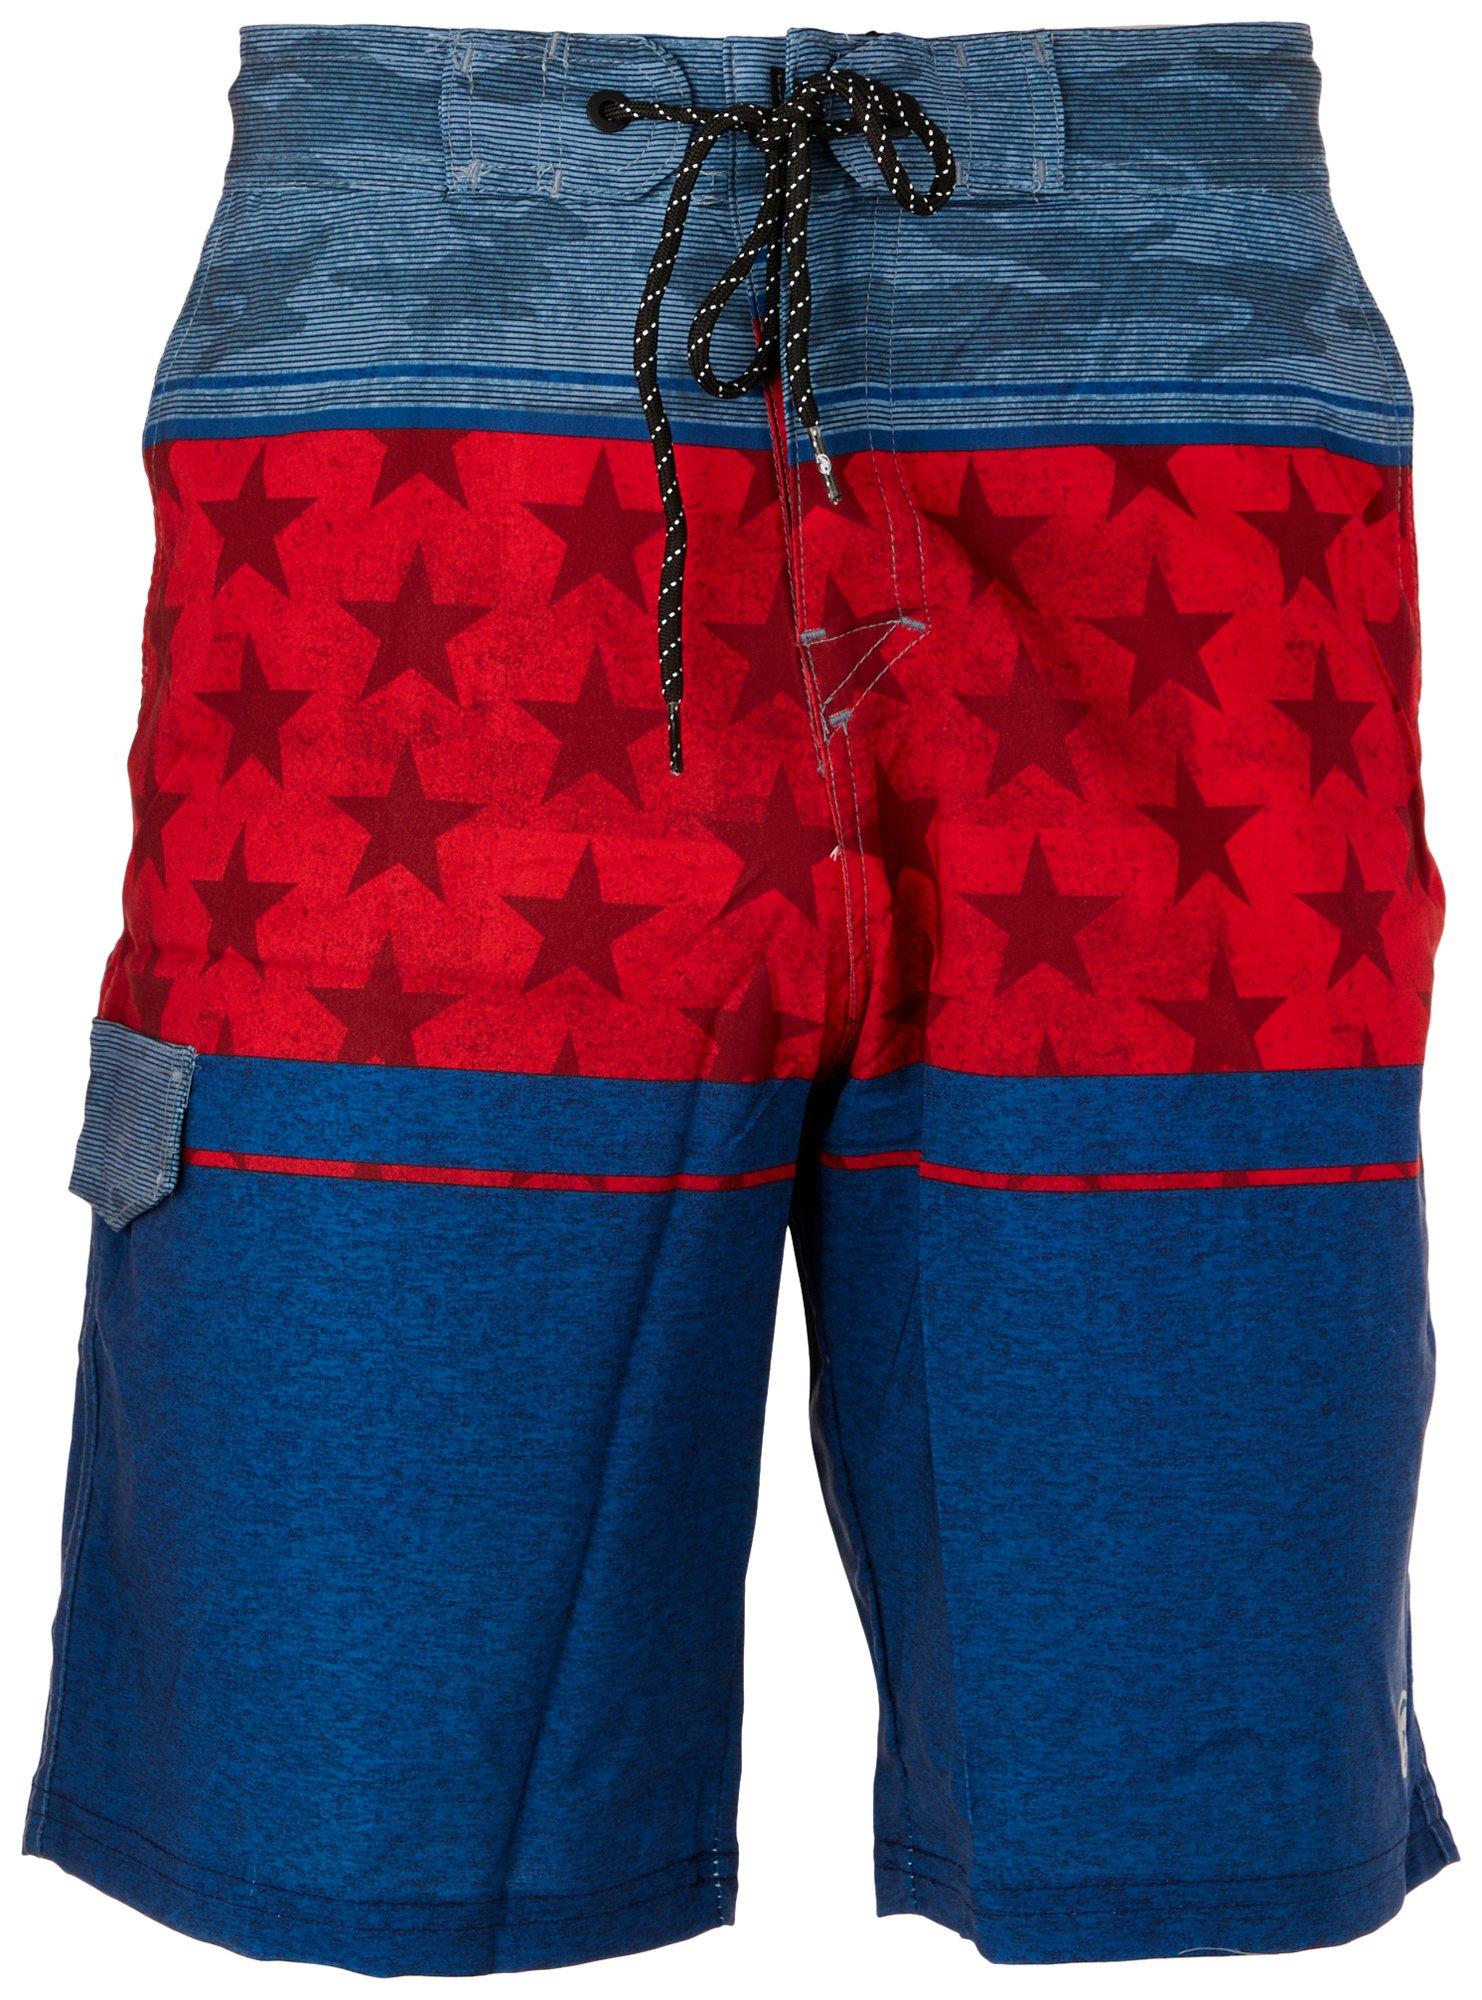 Ocean Current Mens 9.5 in. Stars and Camo Print Board Short